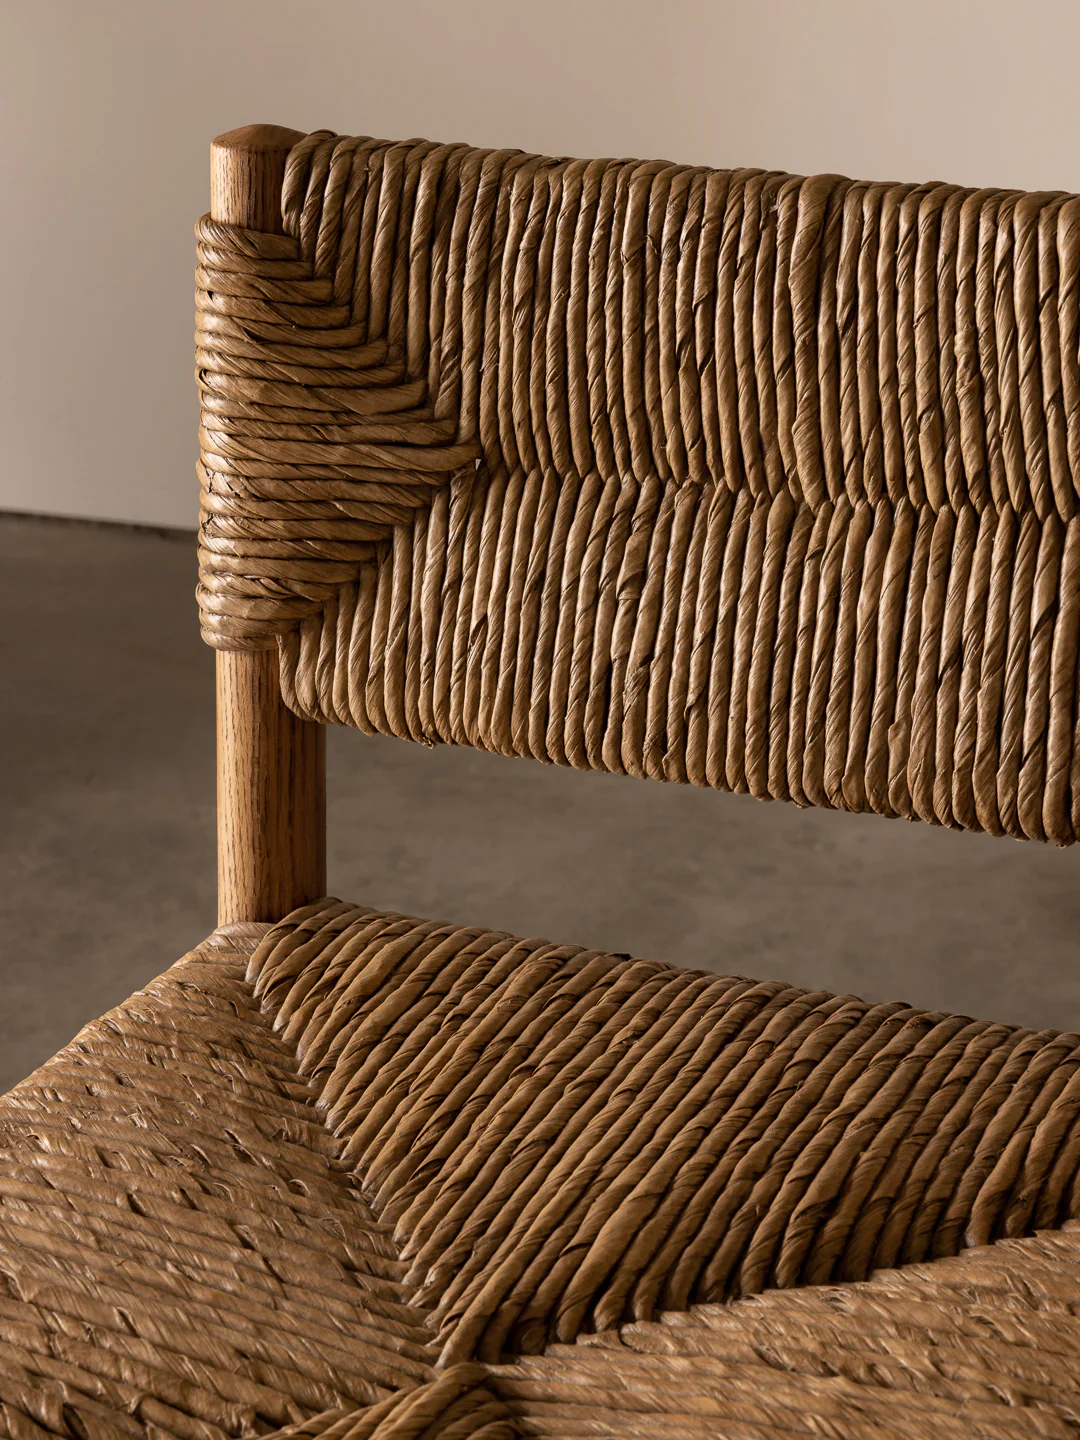 a close up of a chair made of wicker